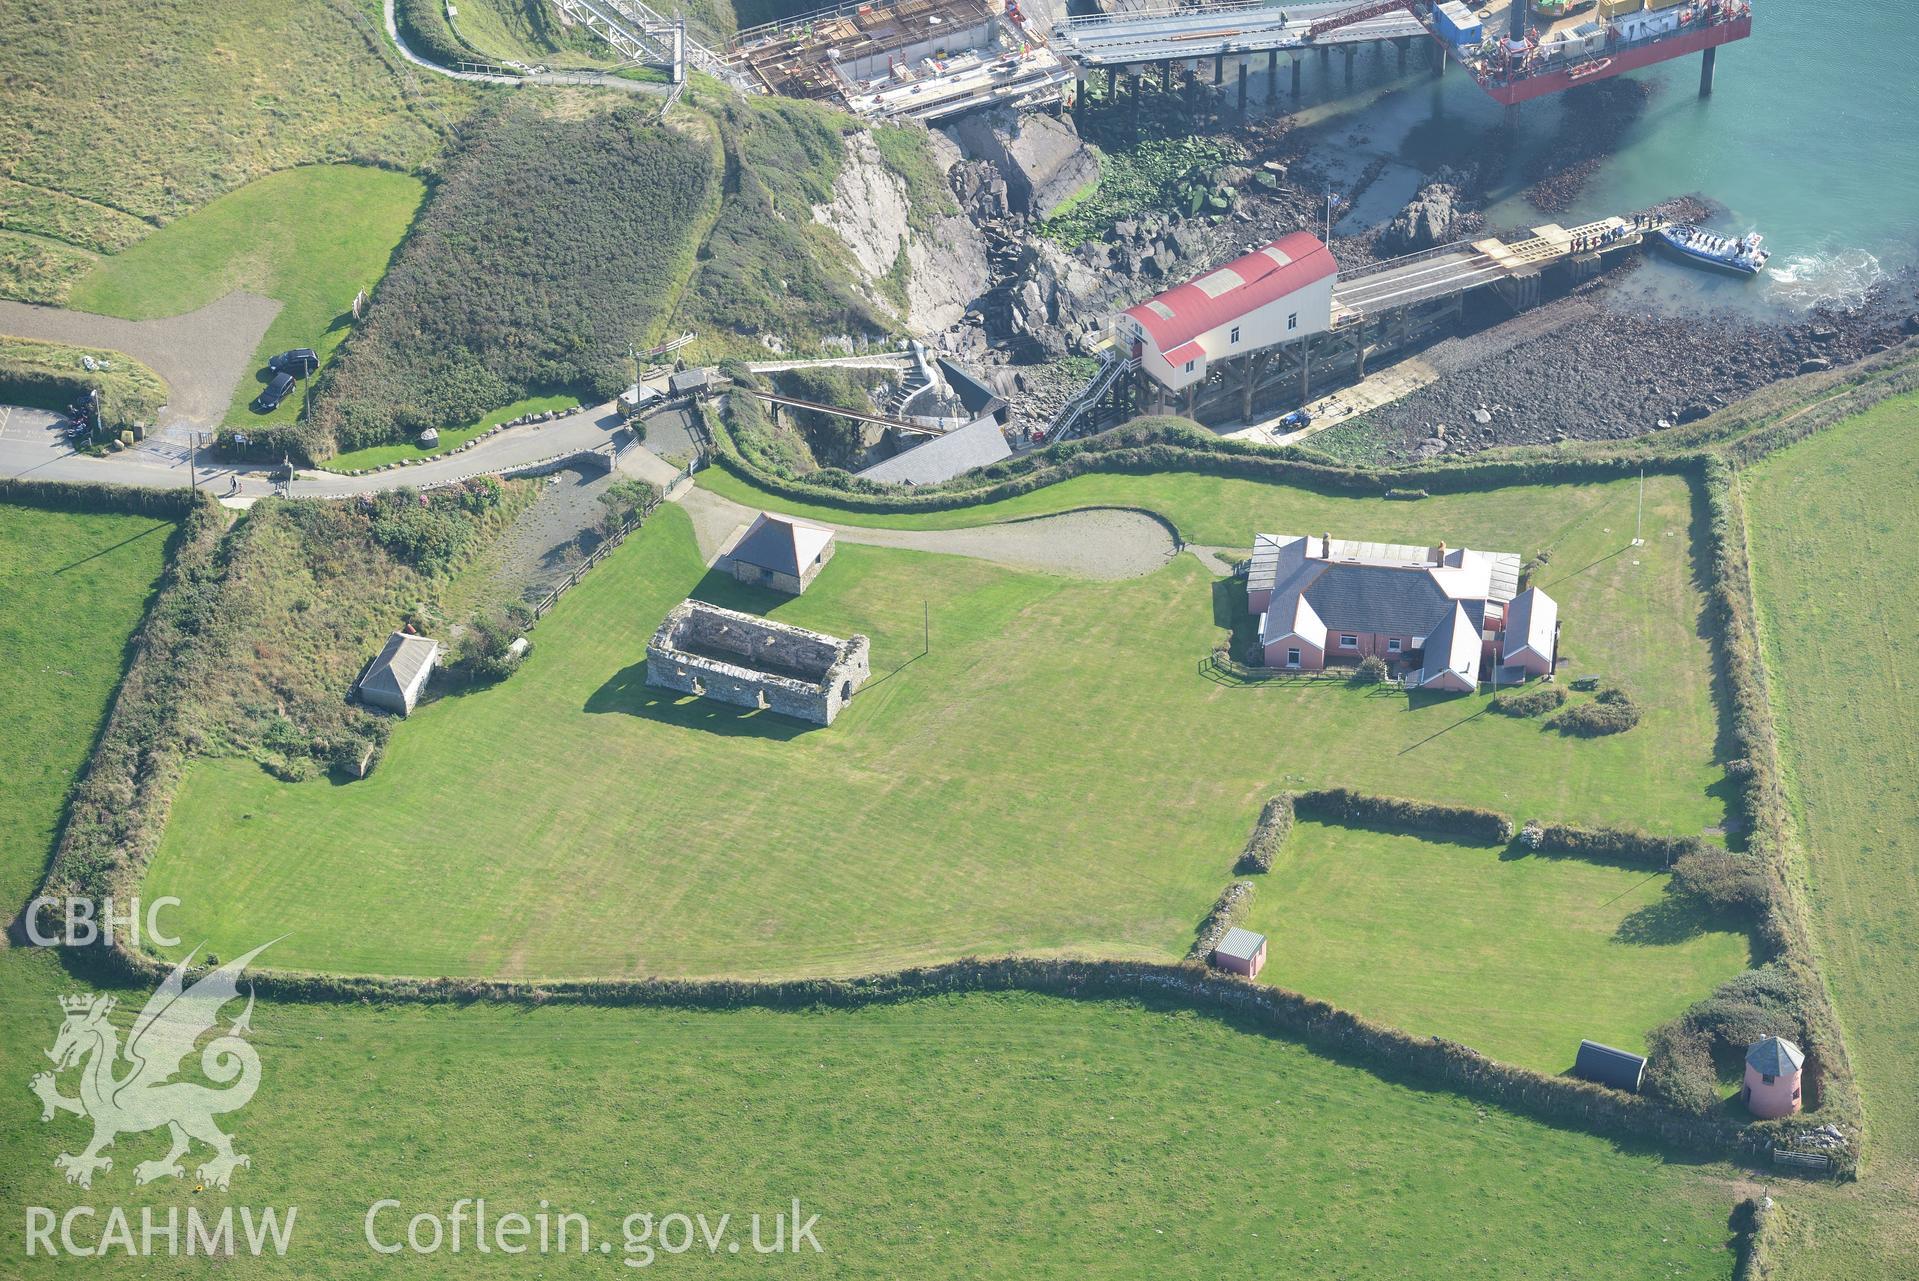 St. Justinian's lifeboat station, St. David's new lifeboat station, St. Justinian's chapel and bungalow, west of St. Davids. Oblique aerial photograph taken during RCAHMW's programme of archaeological aerial reconnaissance by Toby Driver, 30/09/2015.